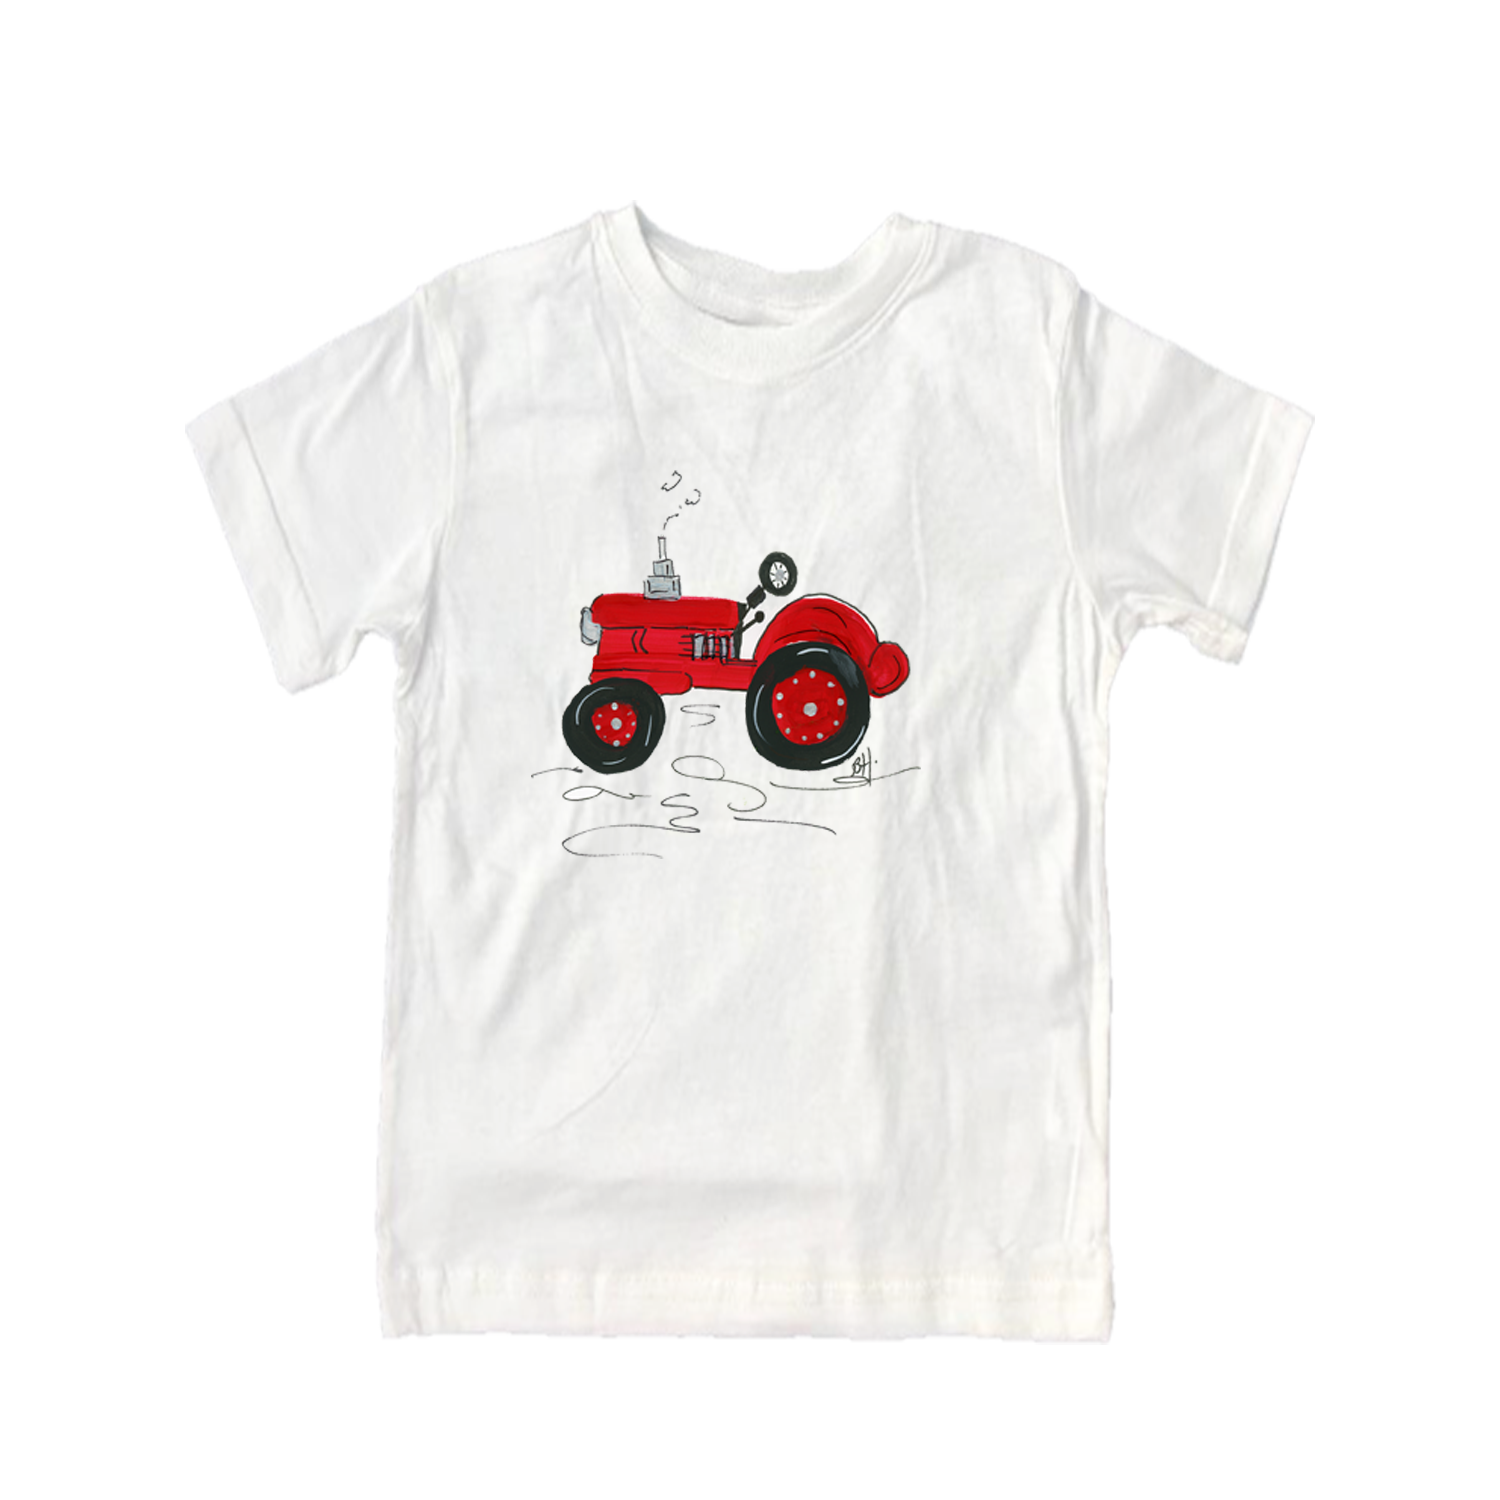 Cotton Tee Shirt Short Sleeve Red Tractor